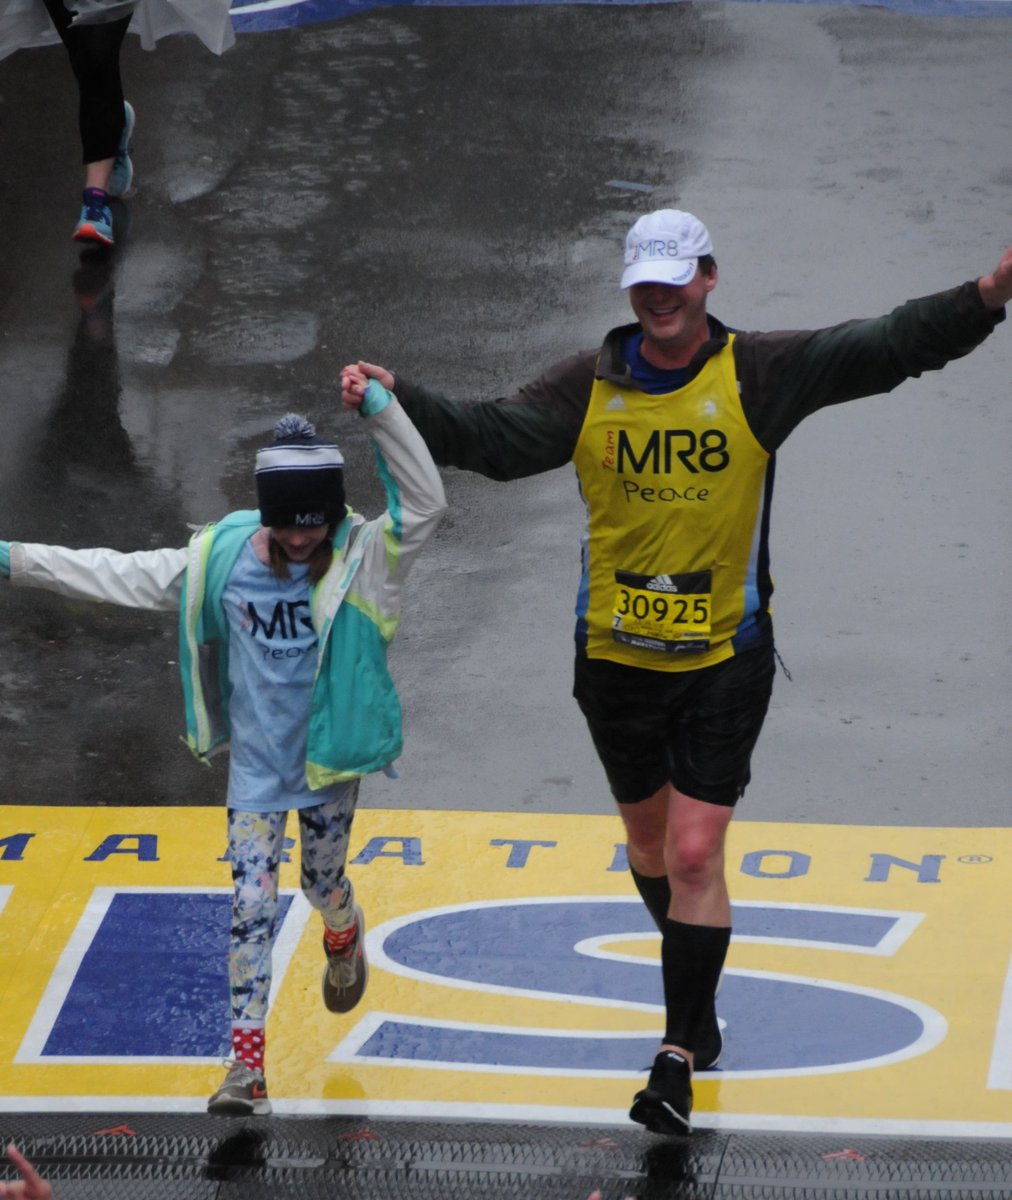 Join us in cheering on our CRO, Dave Gilmartin, who is running his 25th Boston Marathon today! Dave is running on team MR8 in support of the Martin Richard Foundation, which invests in community programs to advance inclusion, kindness, justice, and peace. hubs.ly/Q01Lq11-0